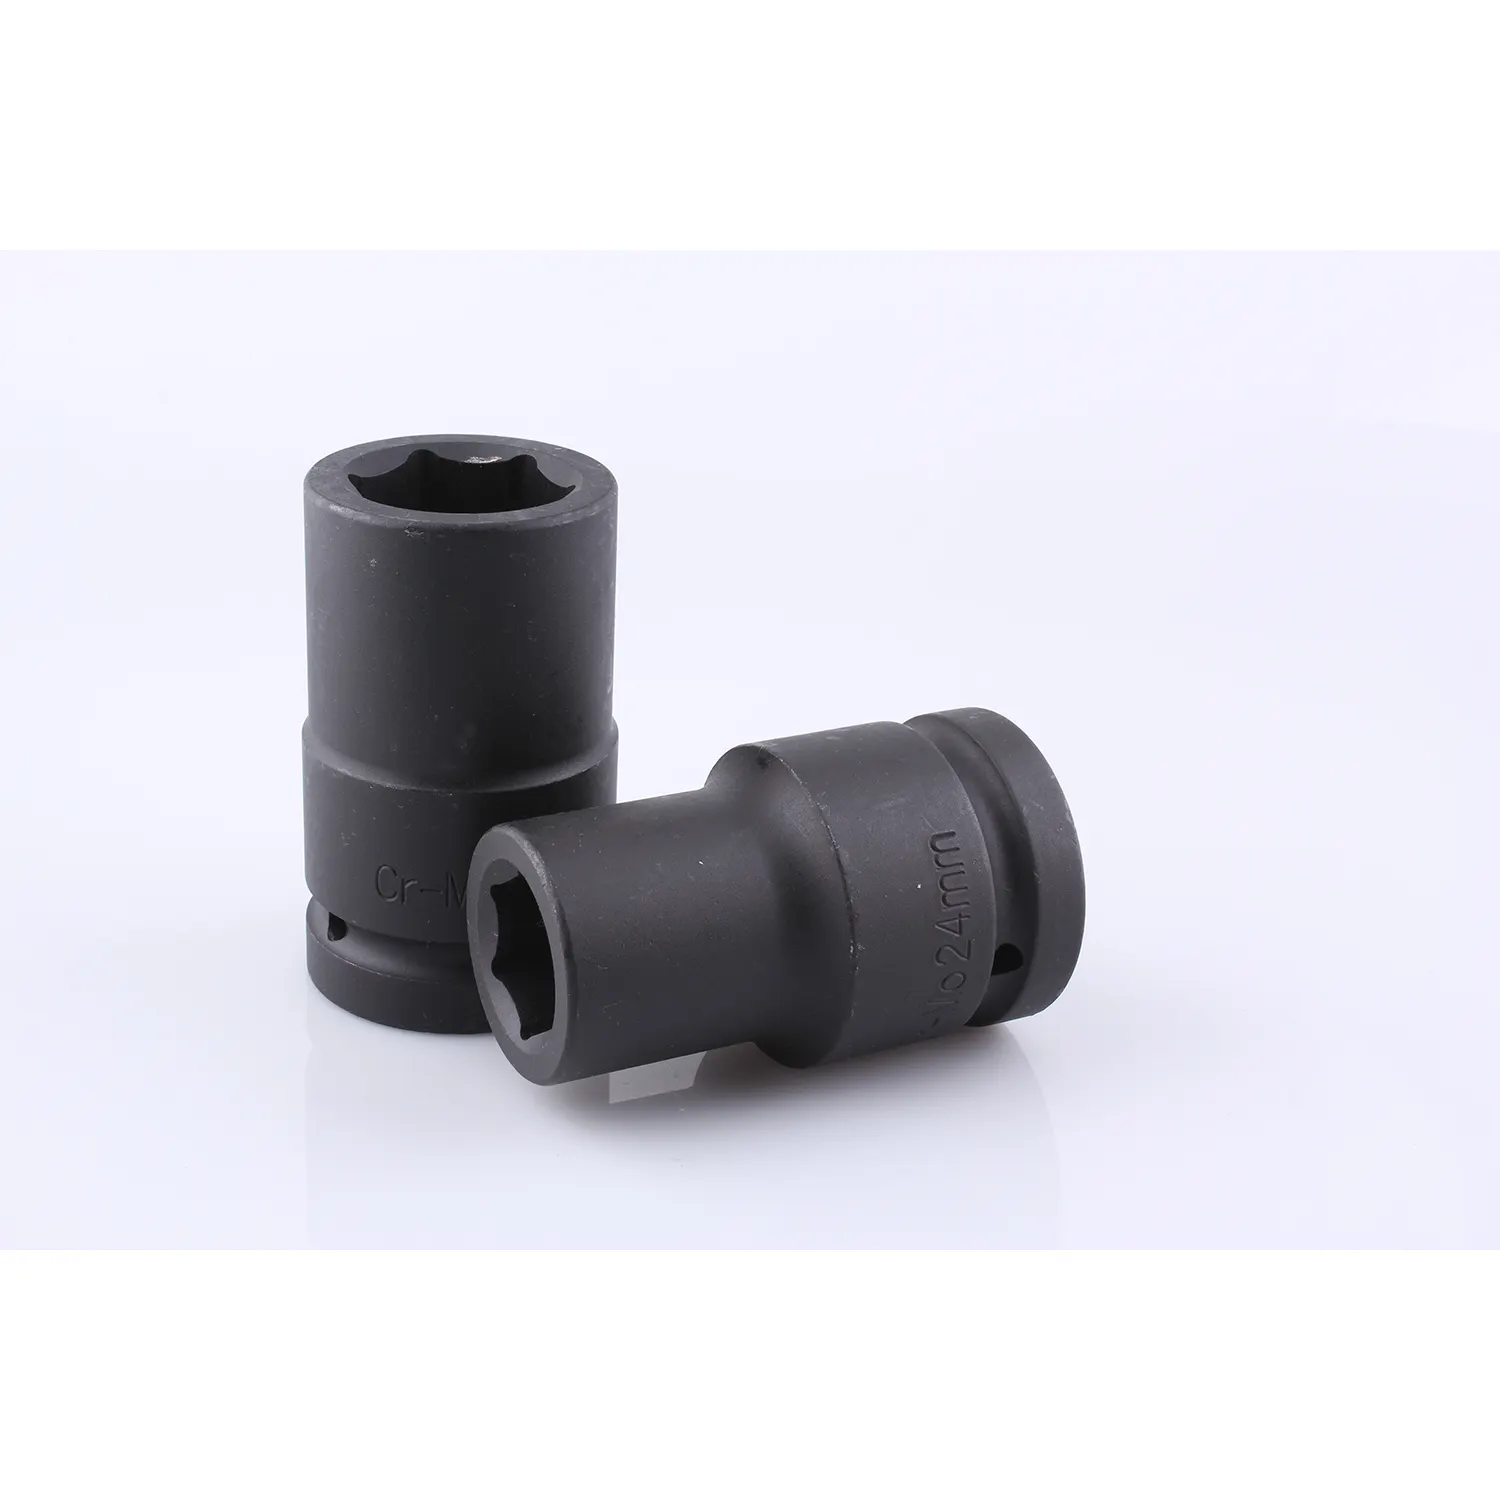 1/2"DR impact short socket for power tools